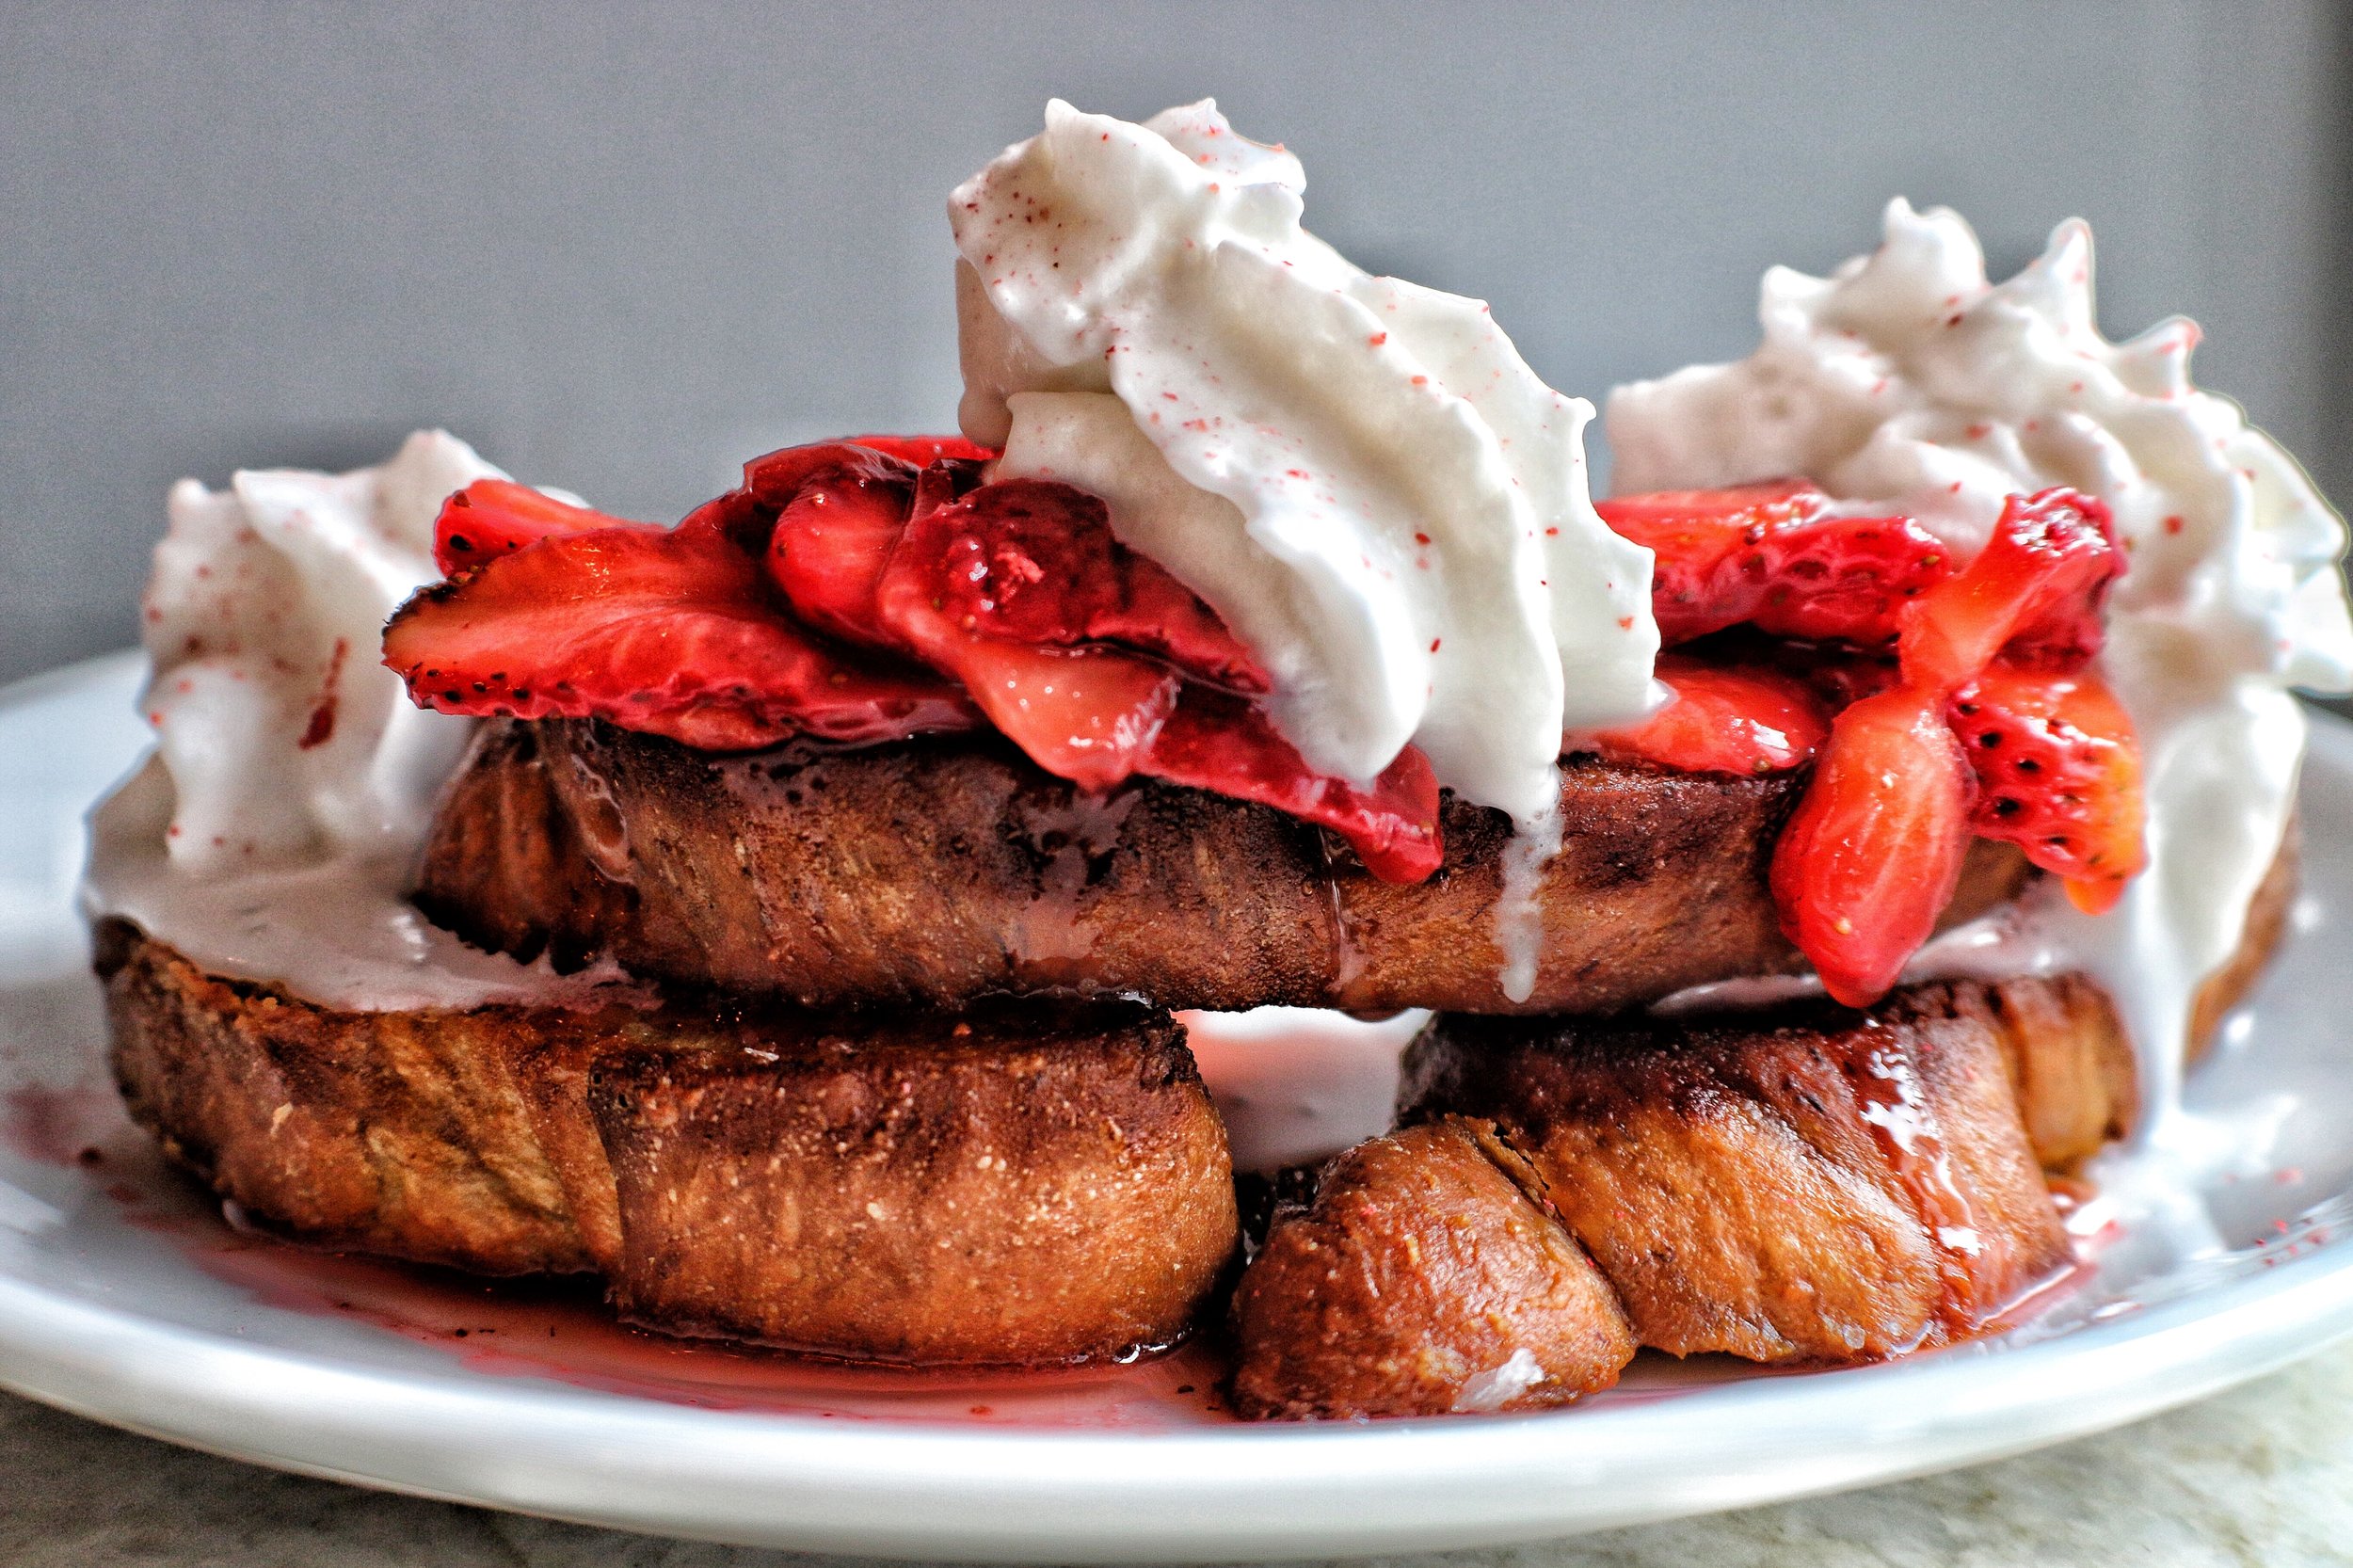  Challah French Toast  strawberry compote, strawberry powder, coconut whip, maple syrup&nbsp; 